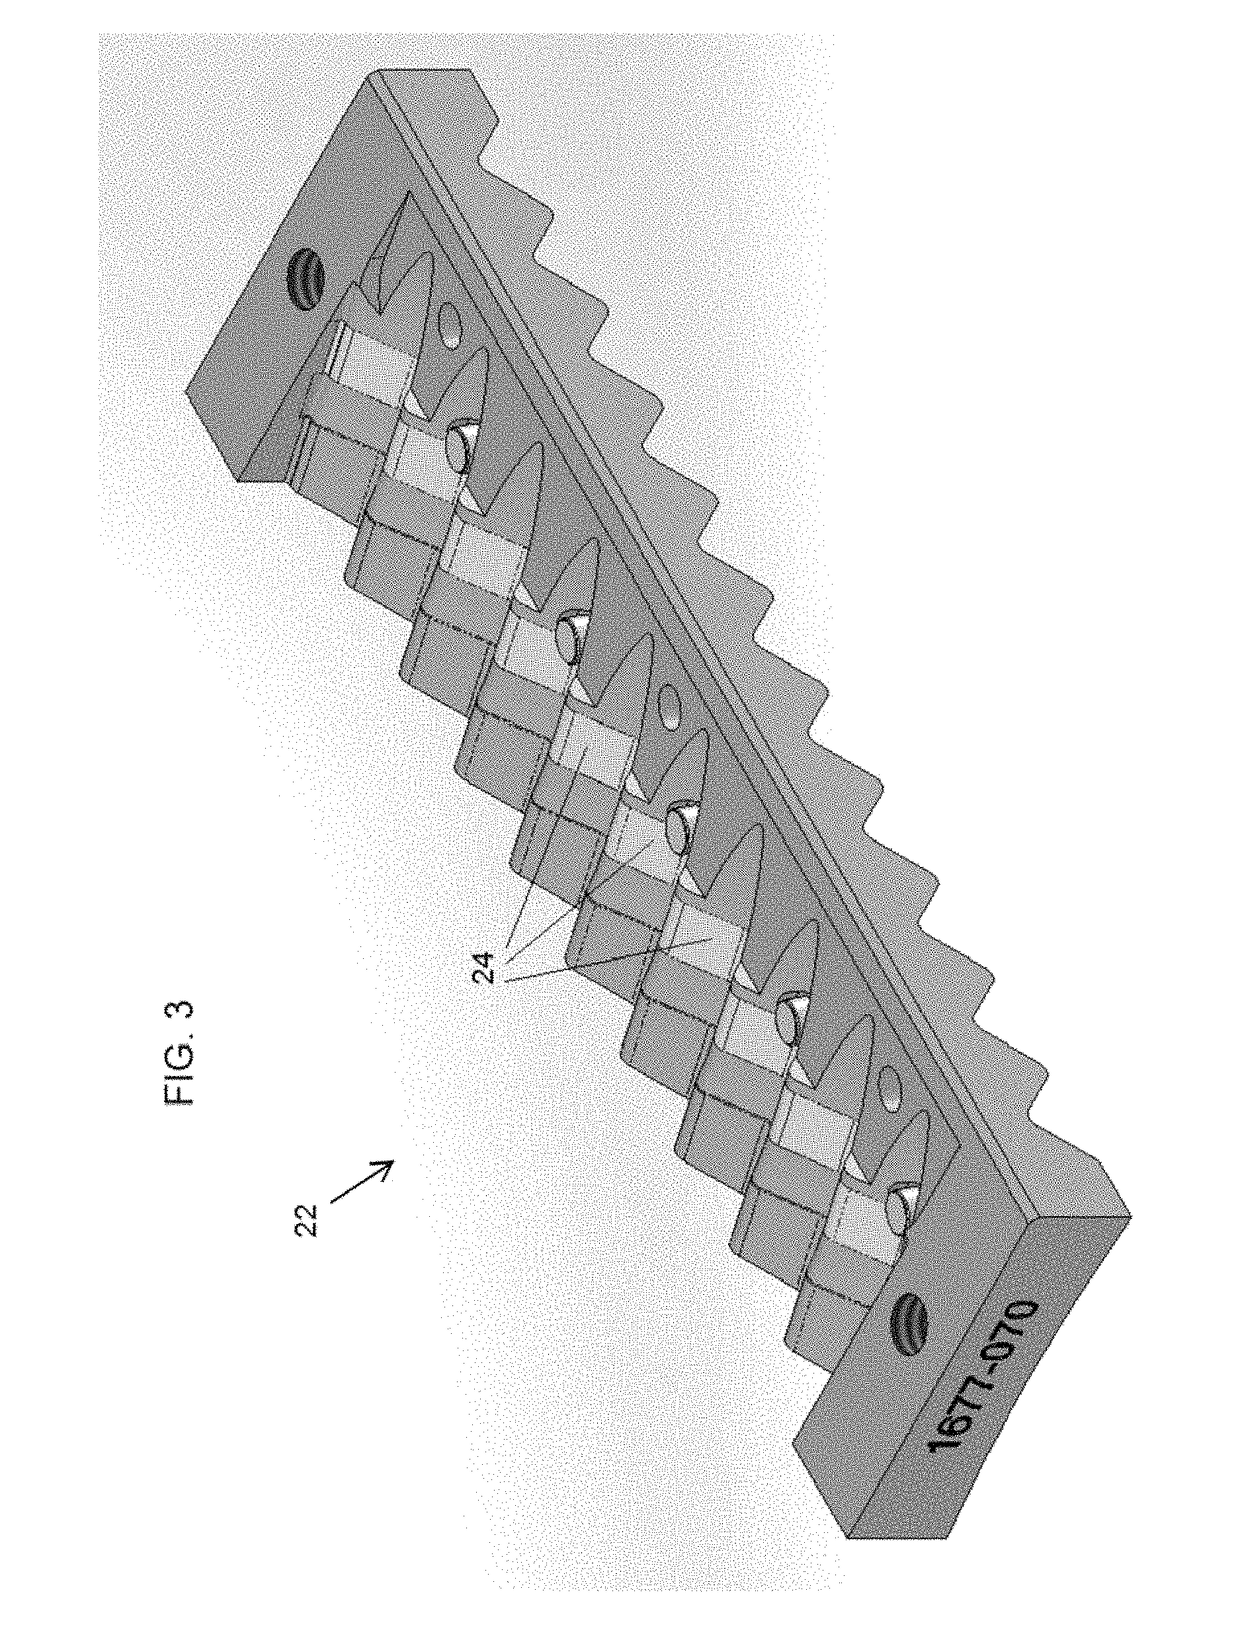 Knife assembly with tab blade